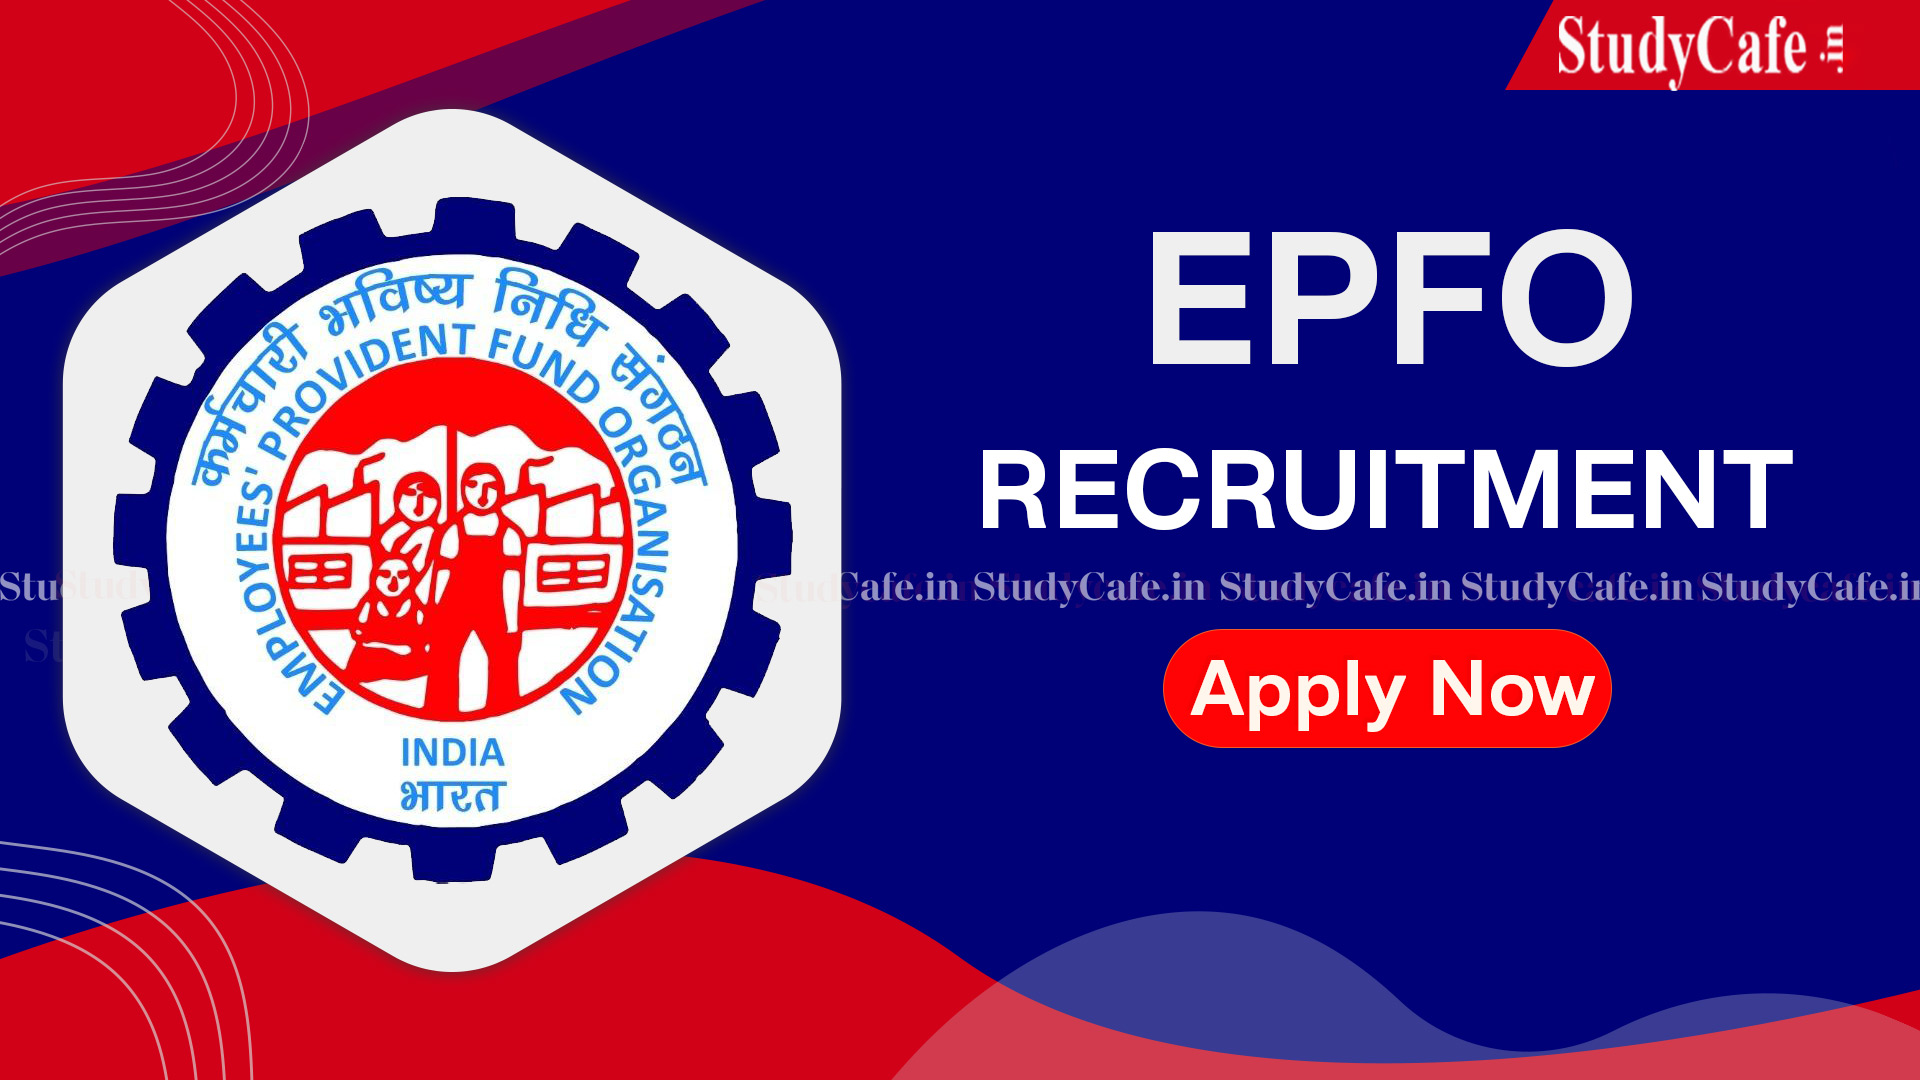 EPFO Recruitment 2022: Check Post, Scale of Pay, How to Apply, and Other Details Here